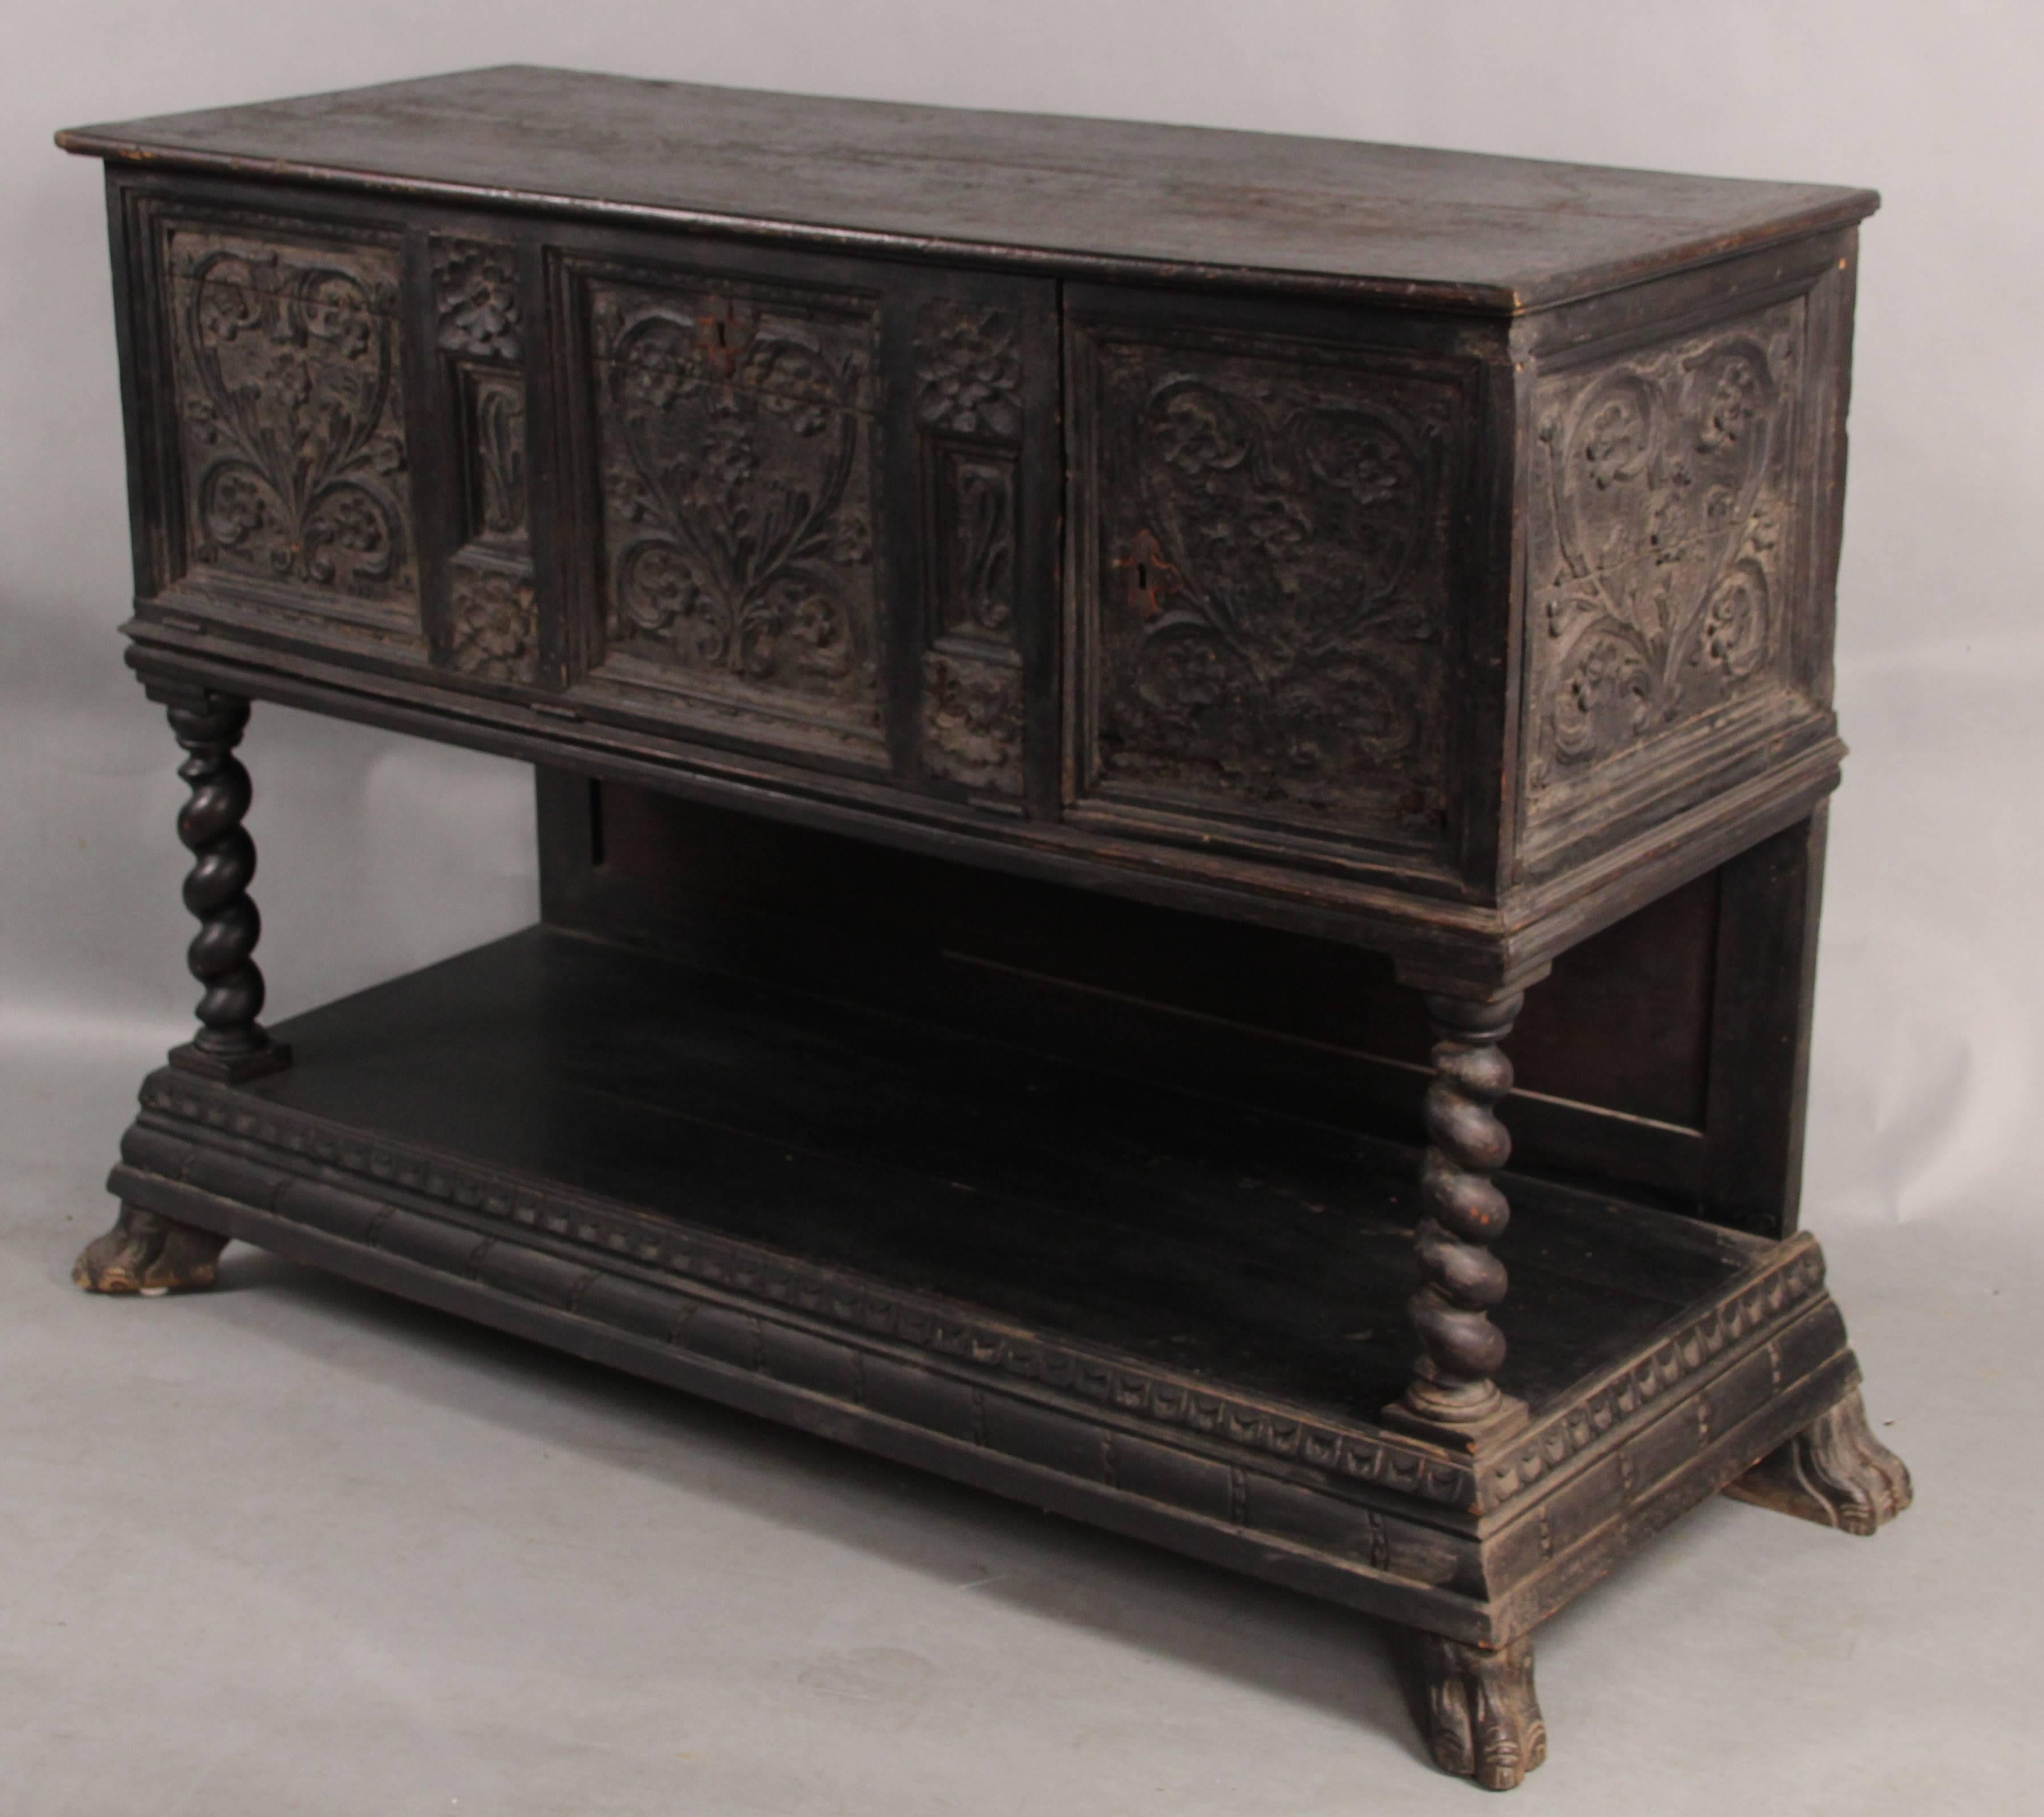 Spanish Colonial Early 19th Century Hand-Carved Spanish Revival Sideboard